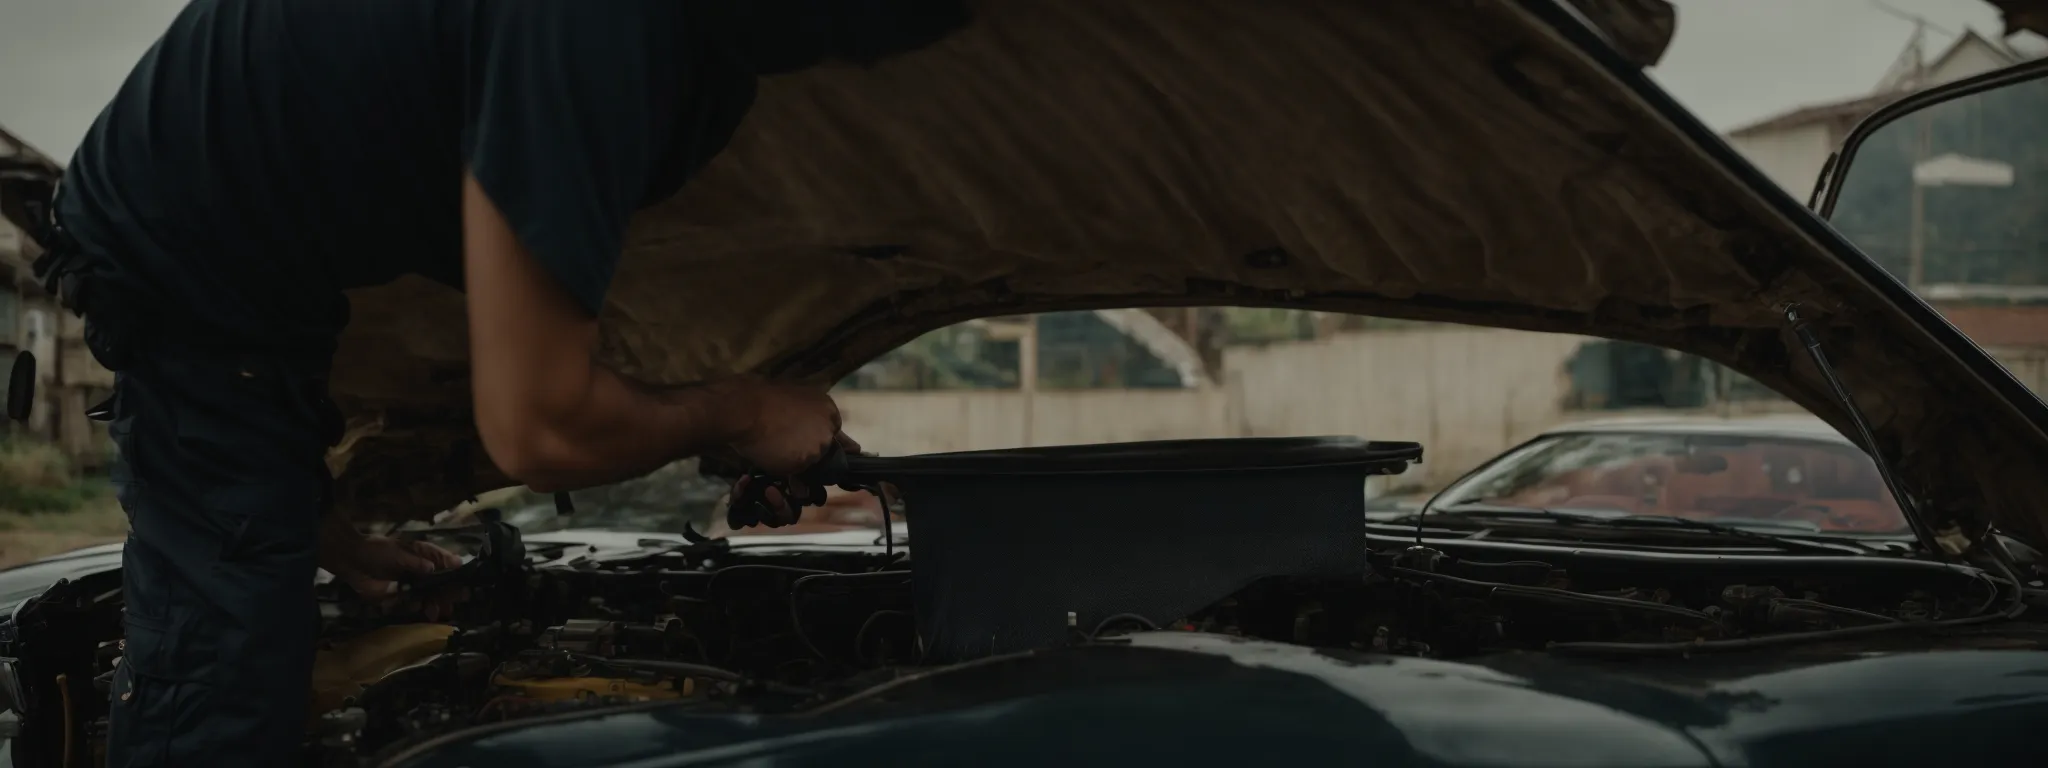 a mechanic leans over the open hood of a classic car, fitting a new high-performance air filter.